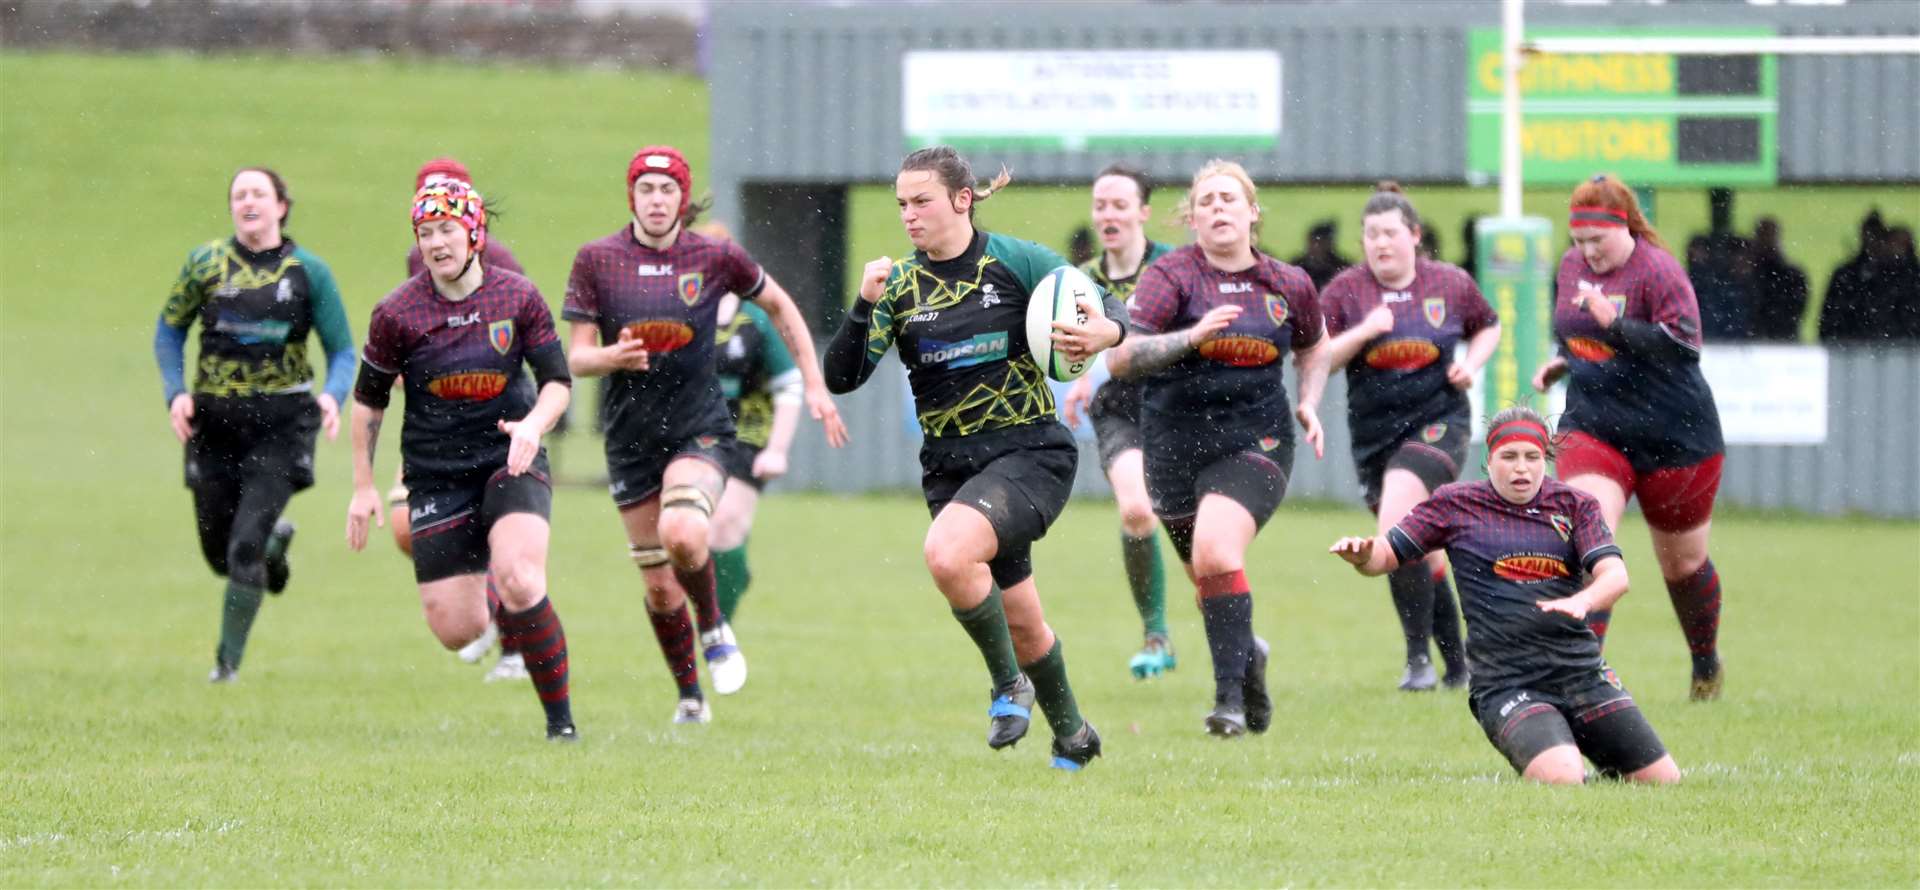 Emmy Smith leaves the Stornoway players in her wake as she sprints to the try line to score. Picture: James Gunn